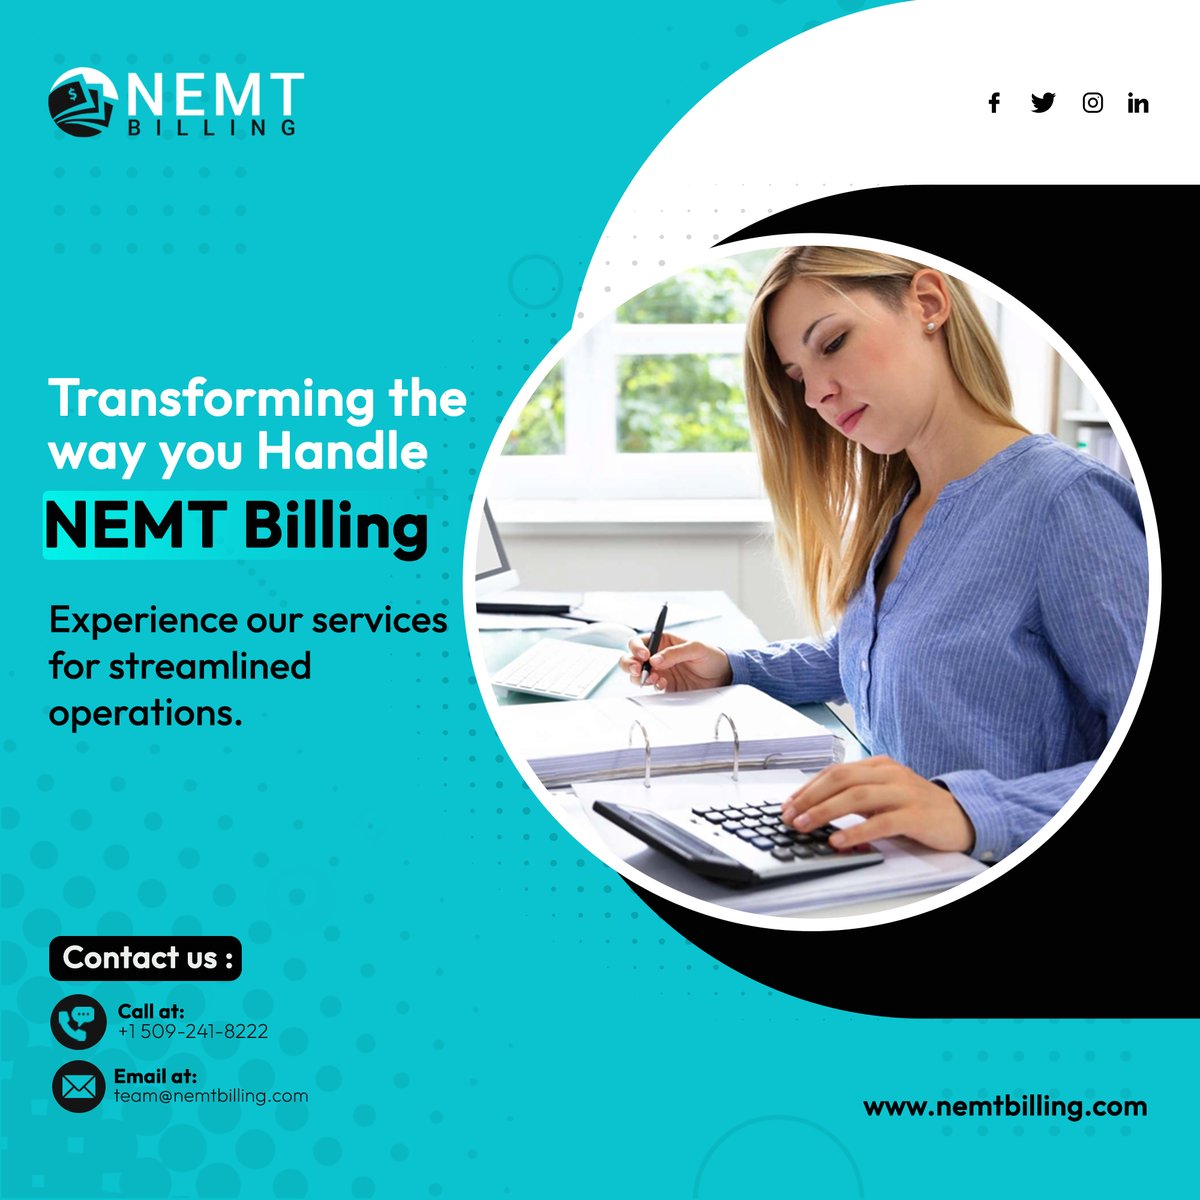 Rely on our expertise as your trusted NEMT billing partner.
With our dedicated support, you can navigate the complex billing landscape with confidence and achieve consistent financial success.
#NemtBillingServices #NEMT #EfficientPayments #NEMTIndustry #ROI #BusinessSuccess